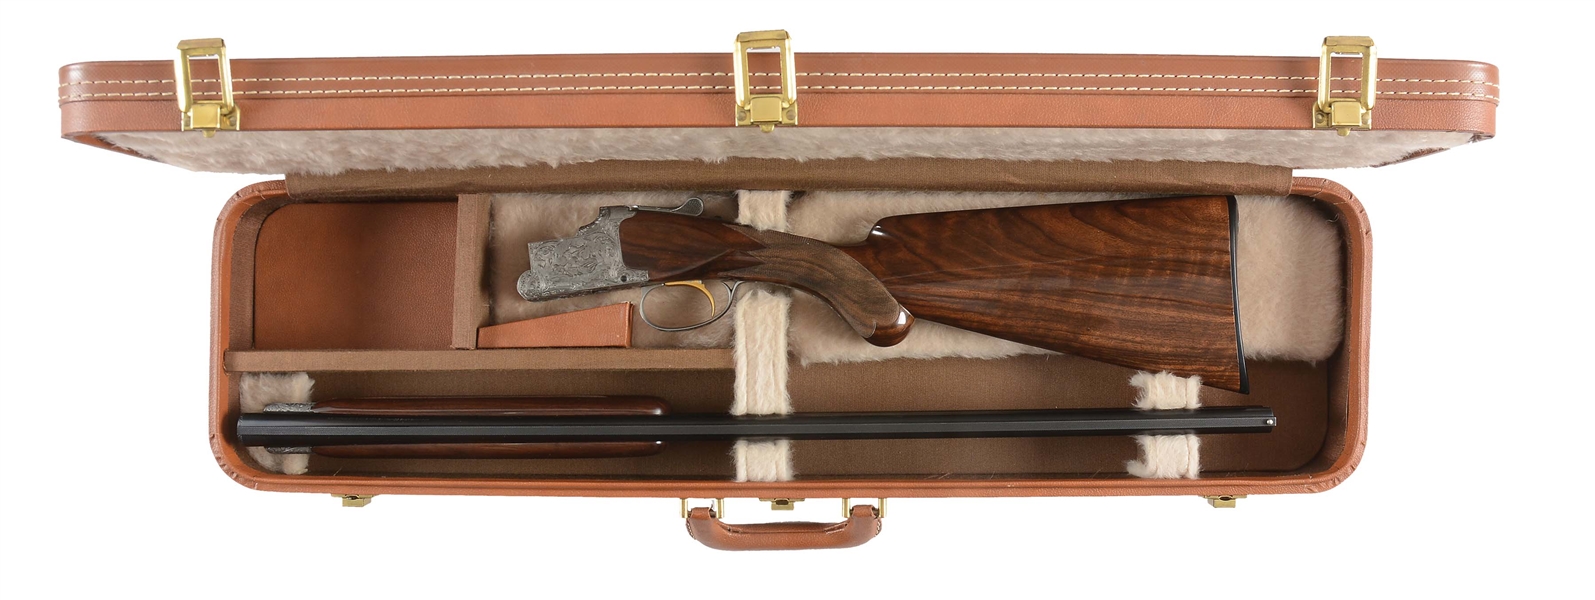 (C) FINE BROWNING DIANA GRADE 20 BORE SUPERPOSED SHOTGUN WITH CASE.